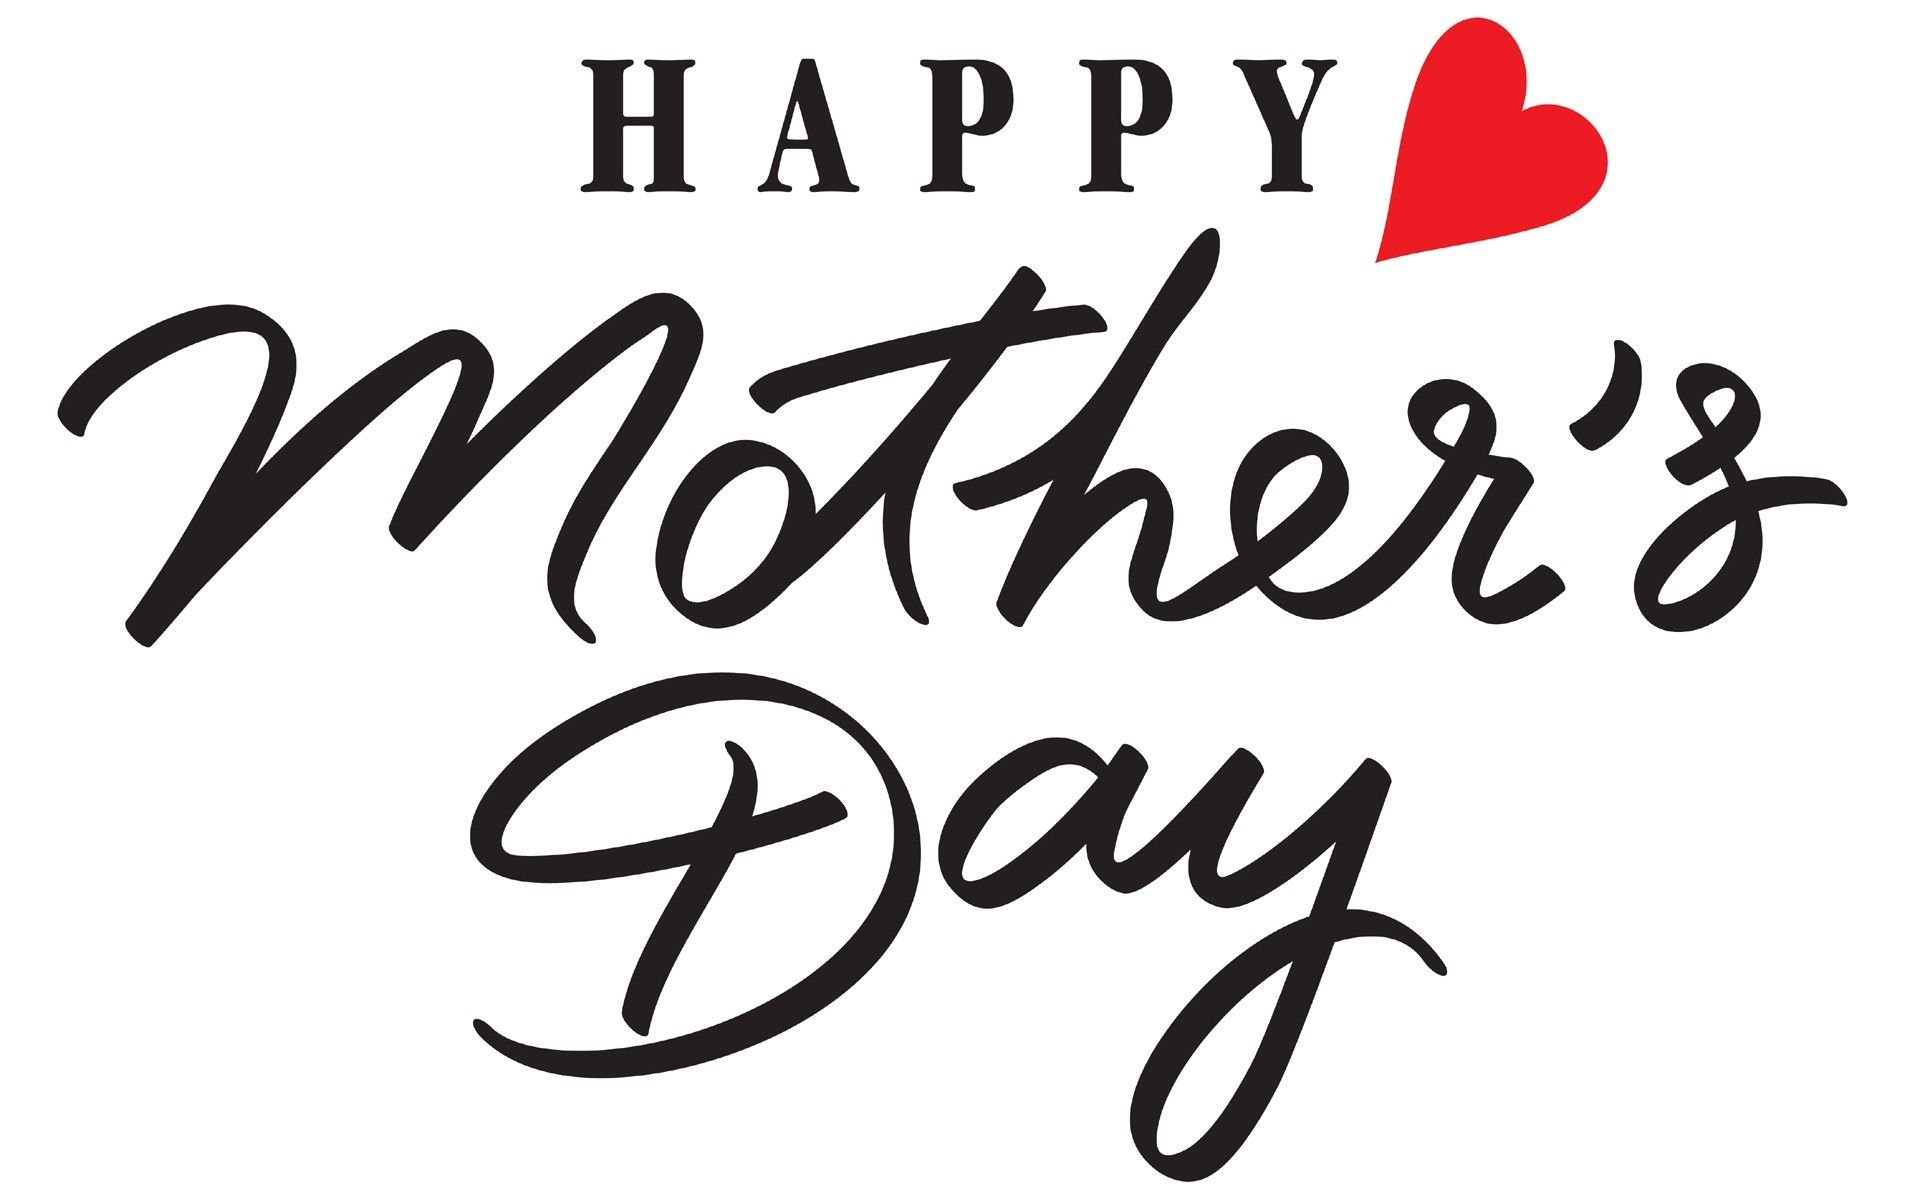 ✓ Happy Mothers Day Image 2021, Pictures, Photos, HD Wallpapers, Greetings,...